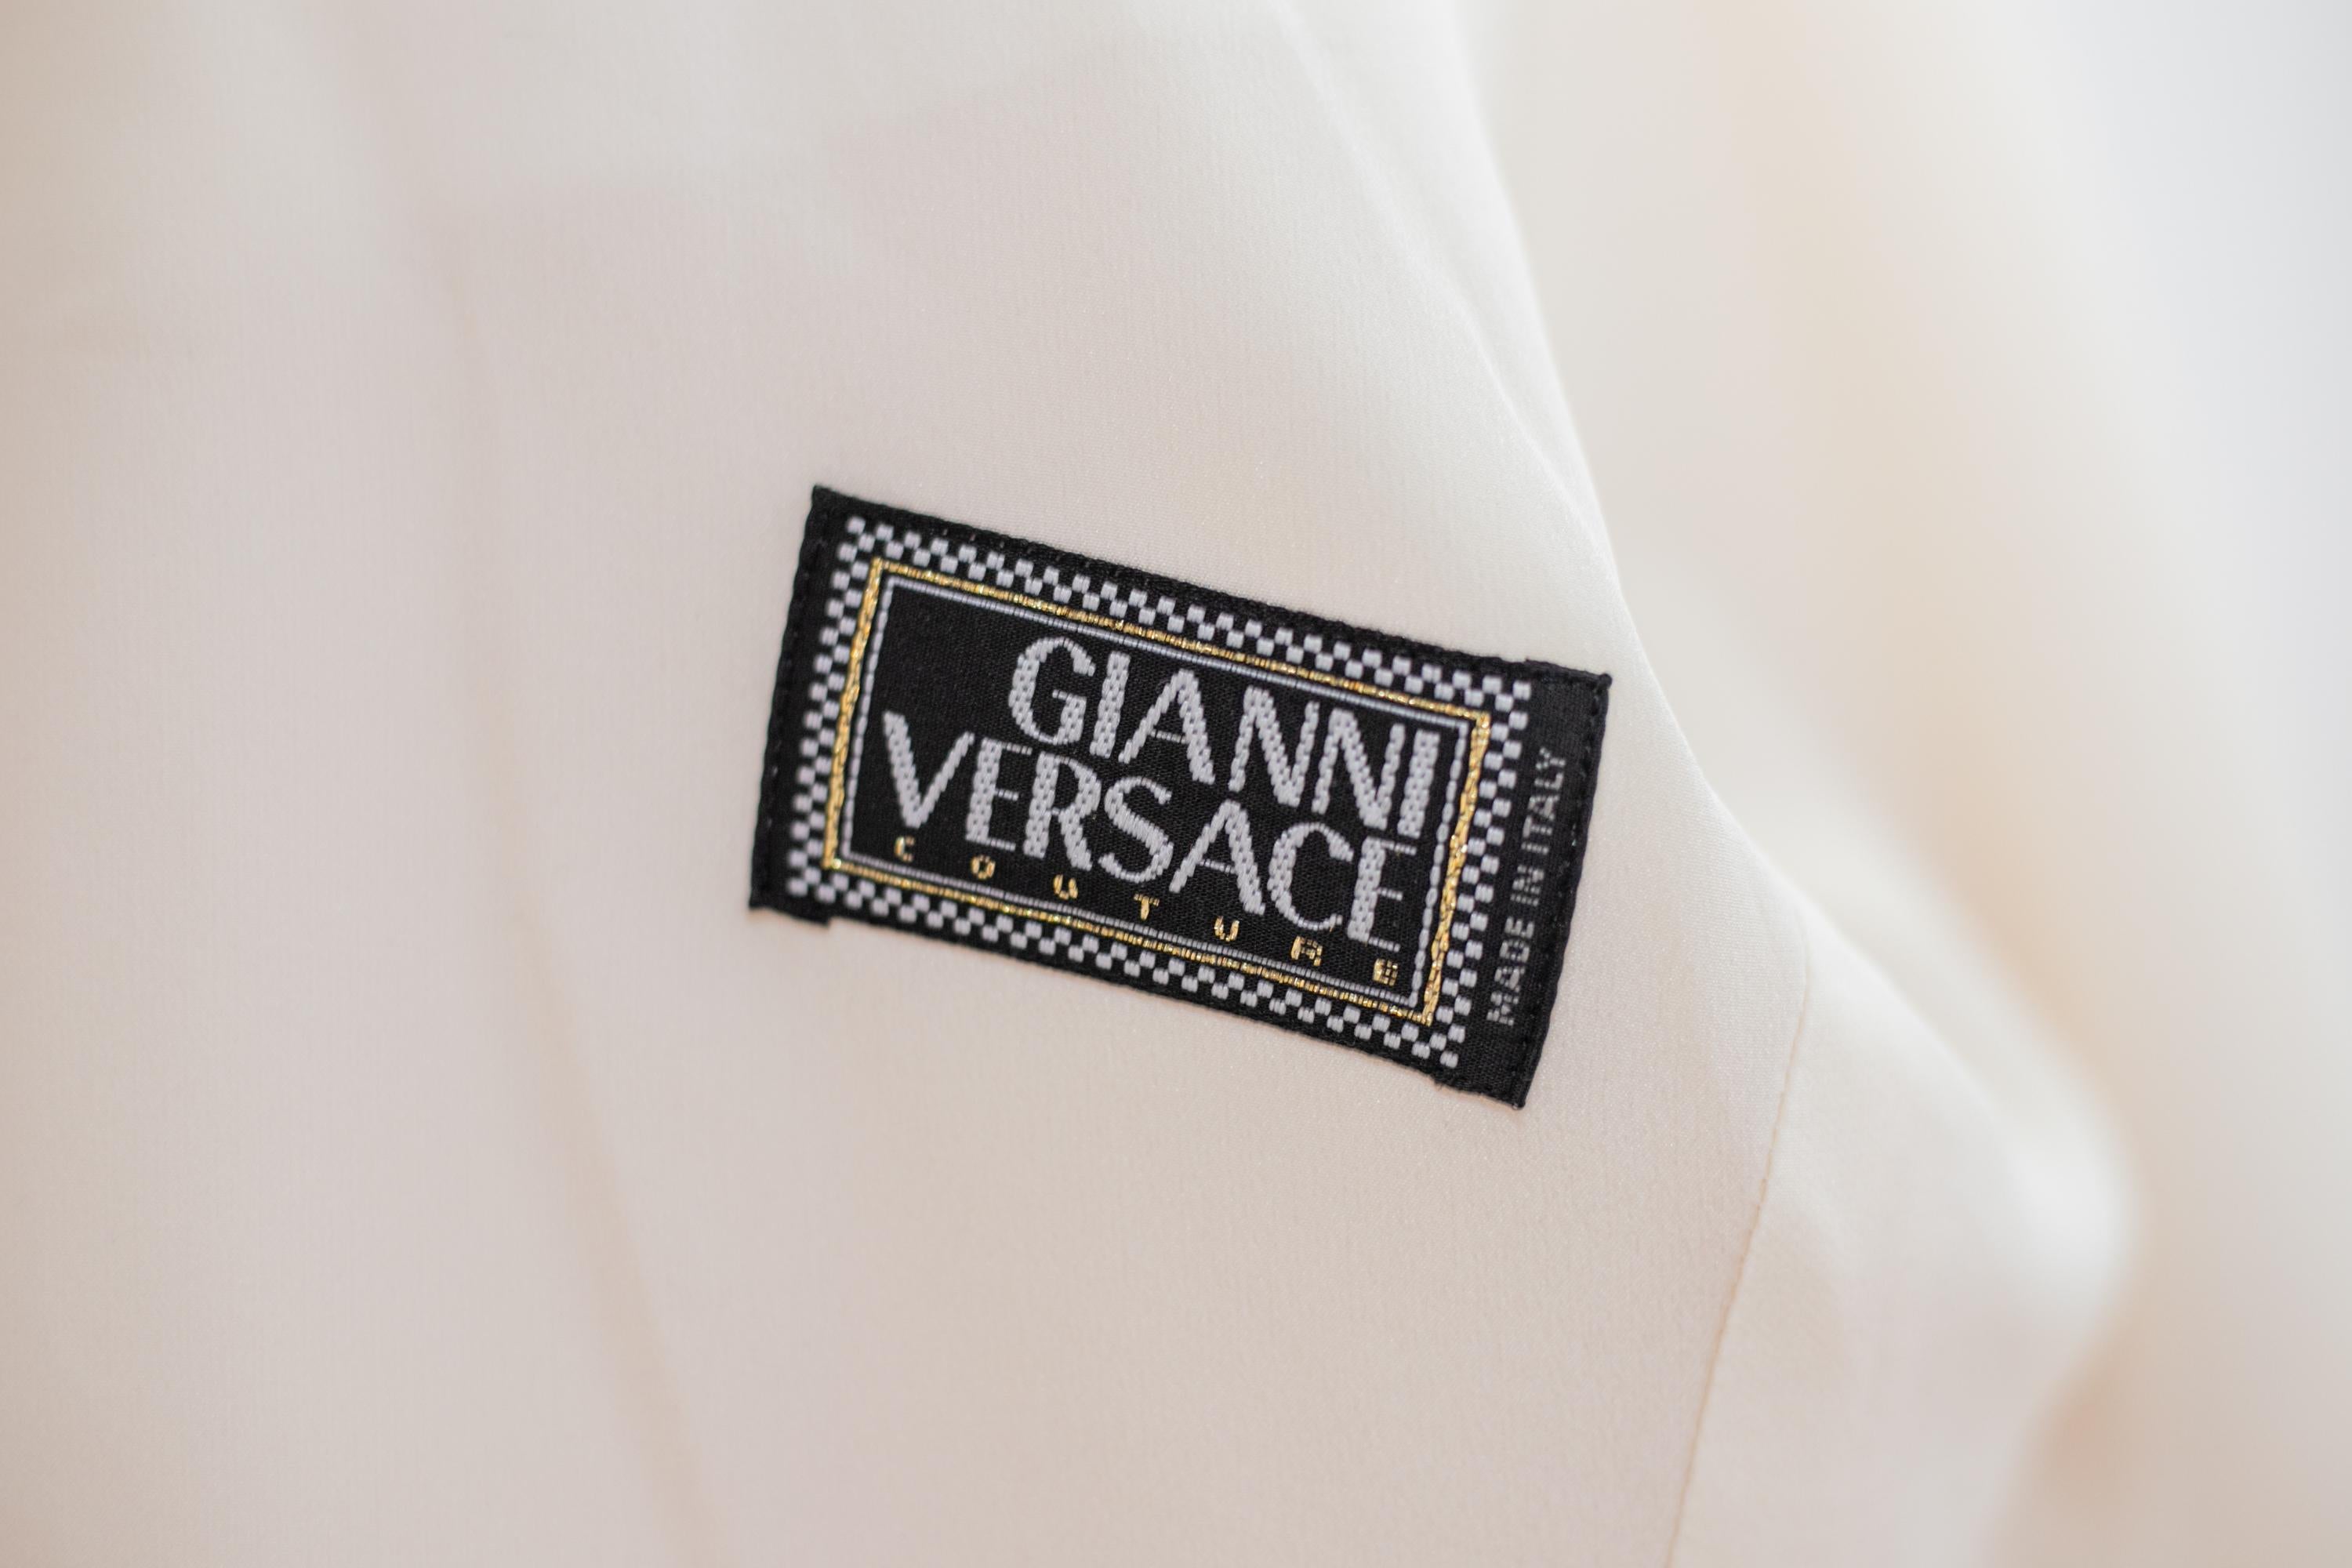 Elegant blazer for woman designed at the end of the 90's, beginning of the 2000's, by designer Gianni Versace, fine Italian manufacture.
The Gianni Versace label is embroidered on the inside right side of the blazer.
The blazer is made entirely of